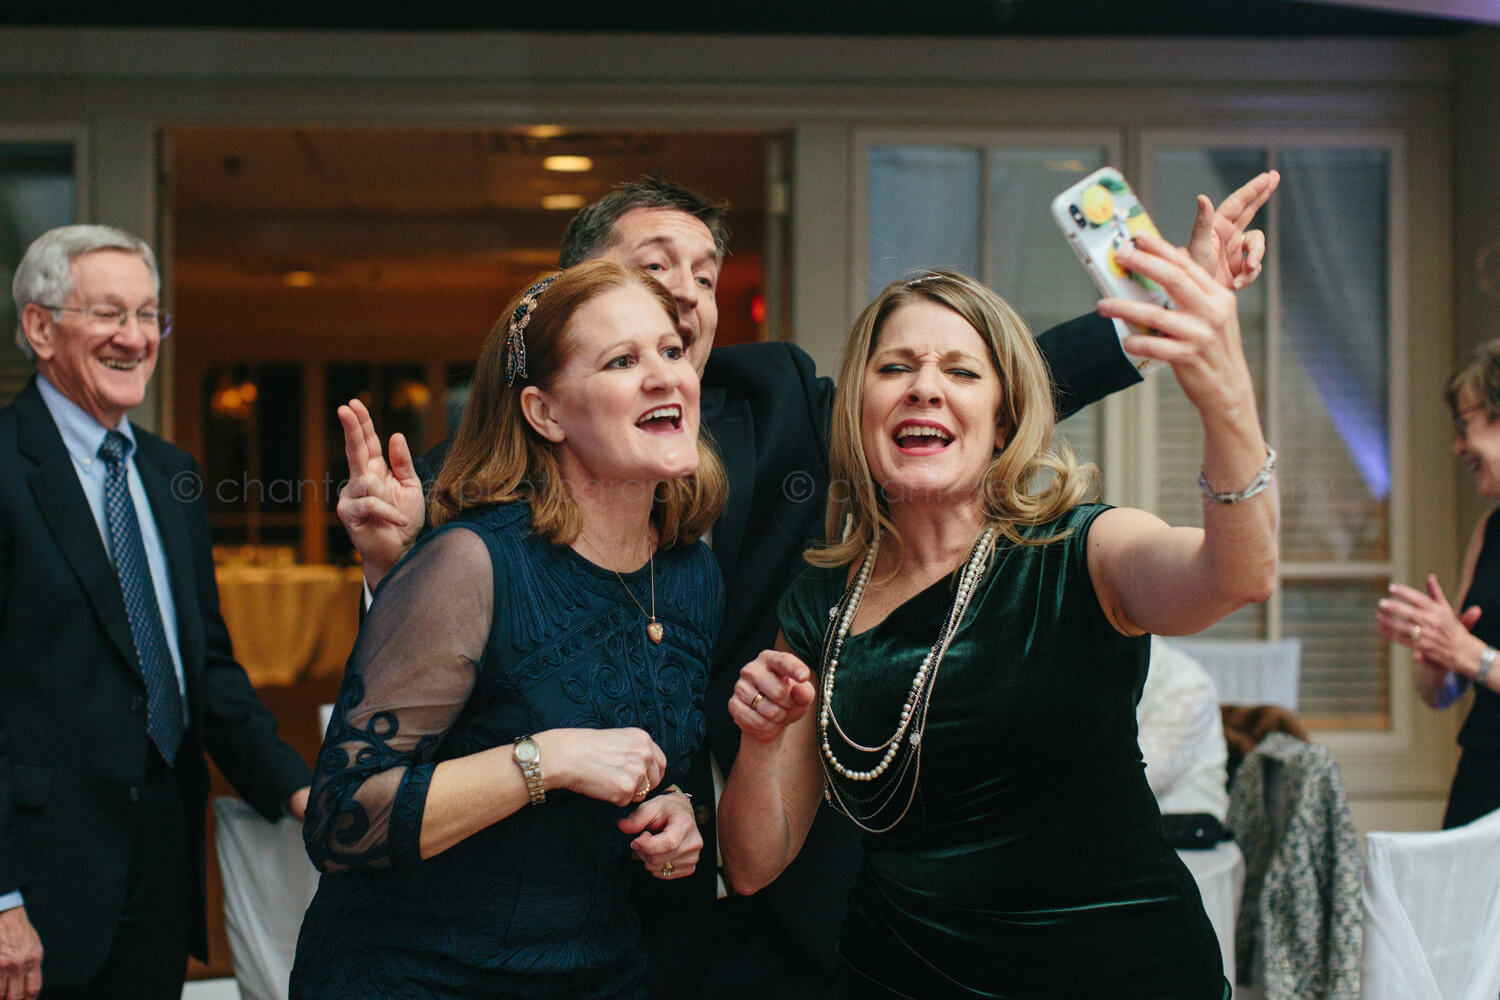 guests dancing while facetiming at wedding reception